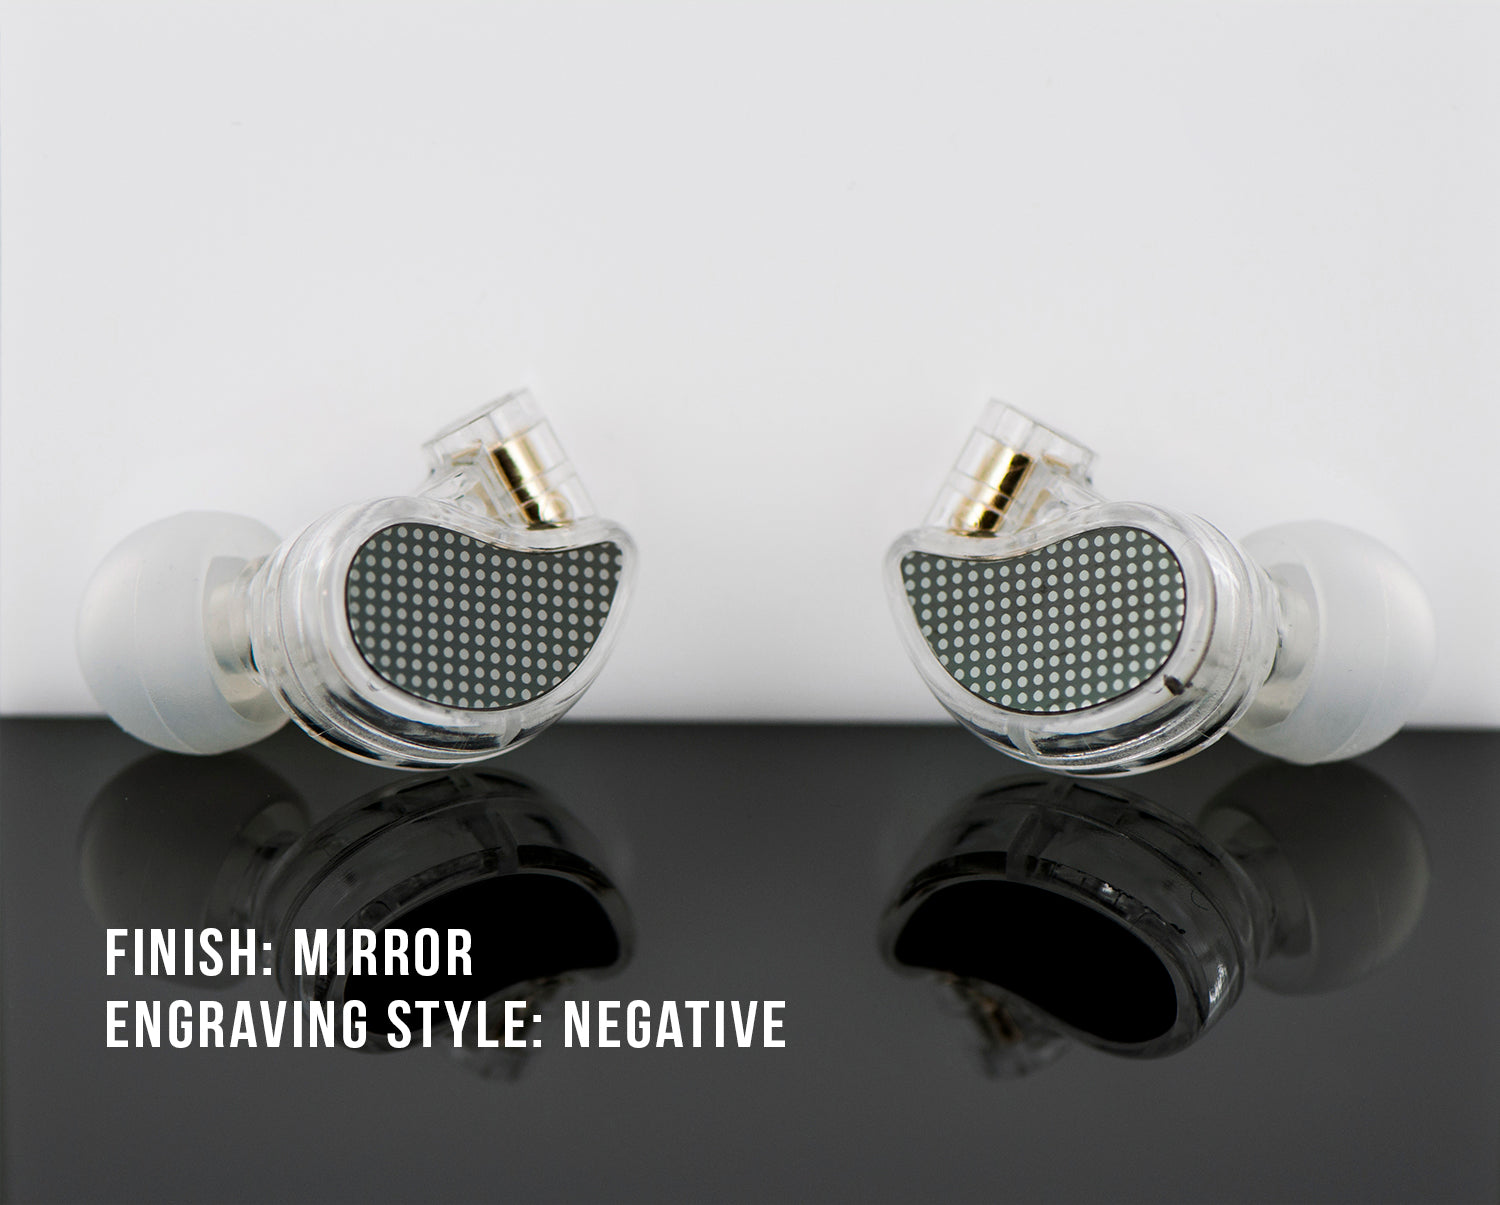 Two high-end in-ear monitors with a mirror finish and negative engraving style, displayed on a reflective surface with labeled text describing their style details.